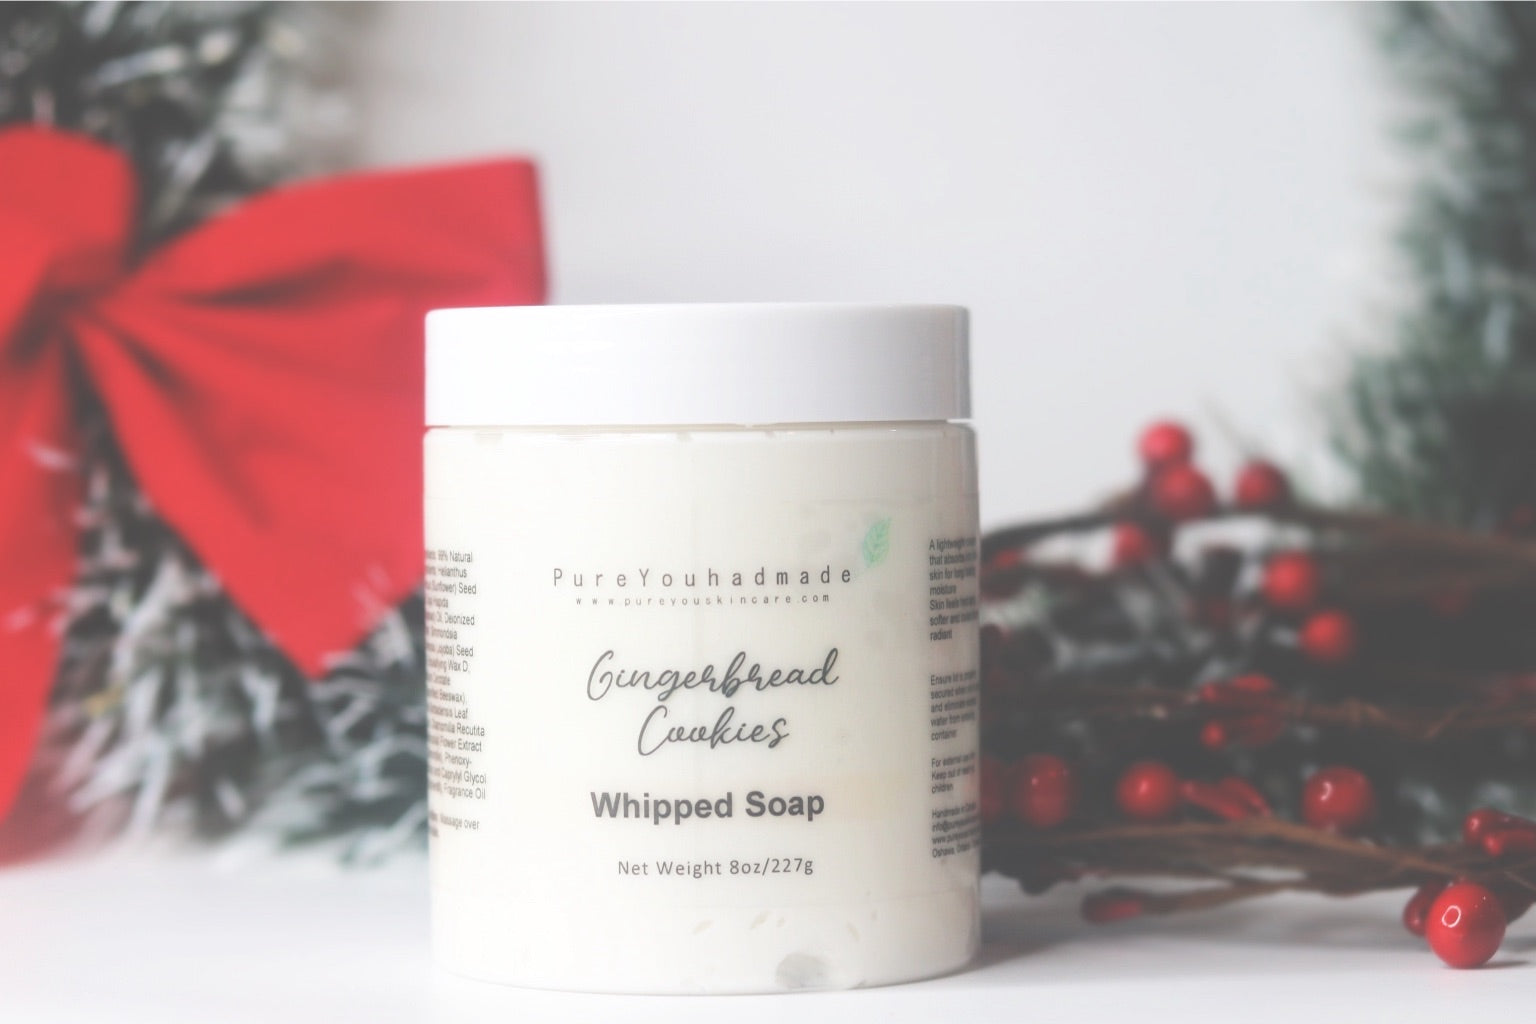 Gingerbread Cookies Whipped Soap